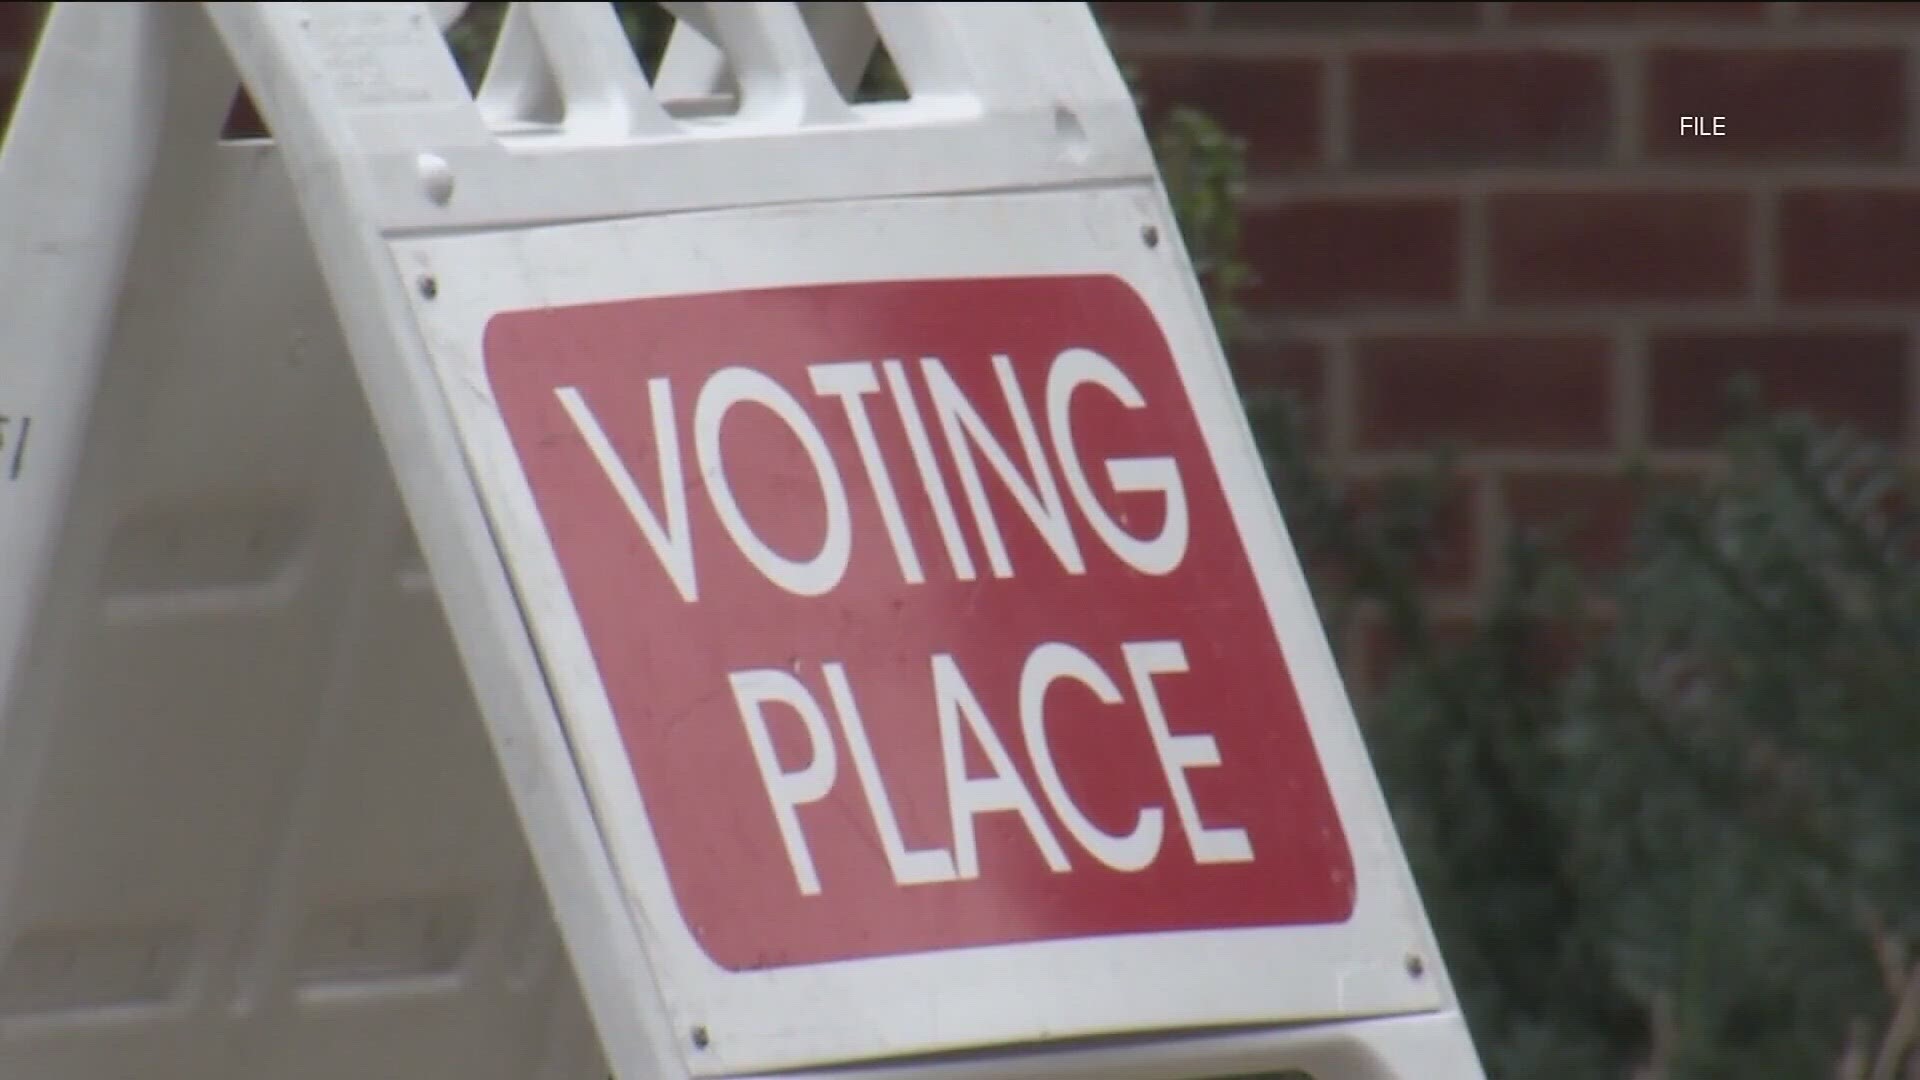 Residents in Mableton headed to the polls Tuesday to vote for mayor and city council. It’s the first time residents have voted for the two since Mableton's cityhood.